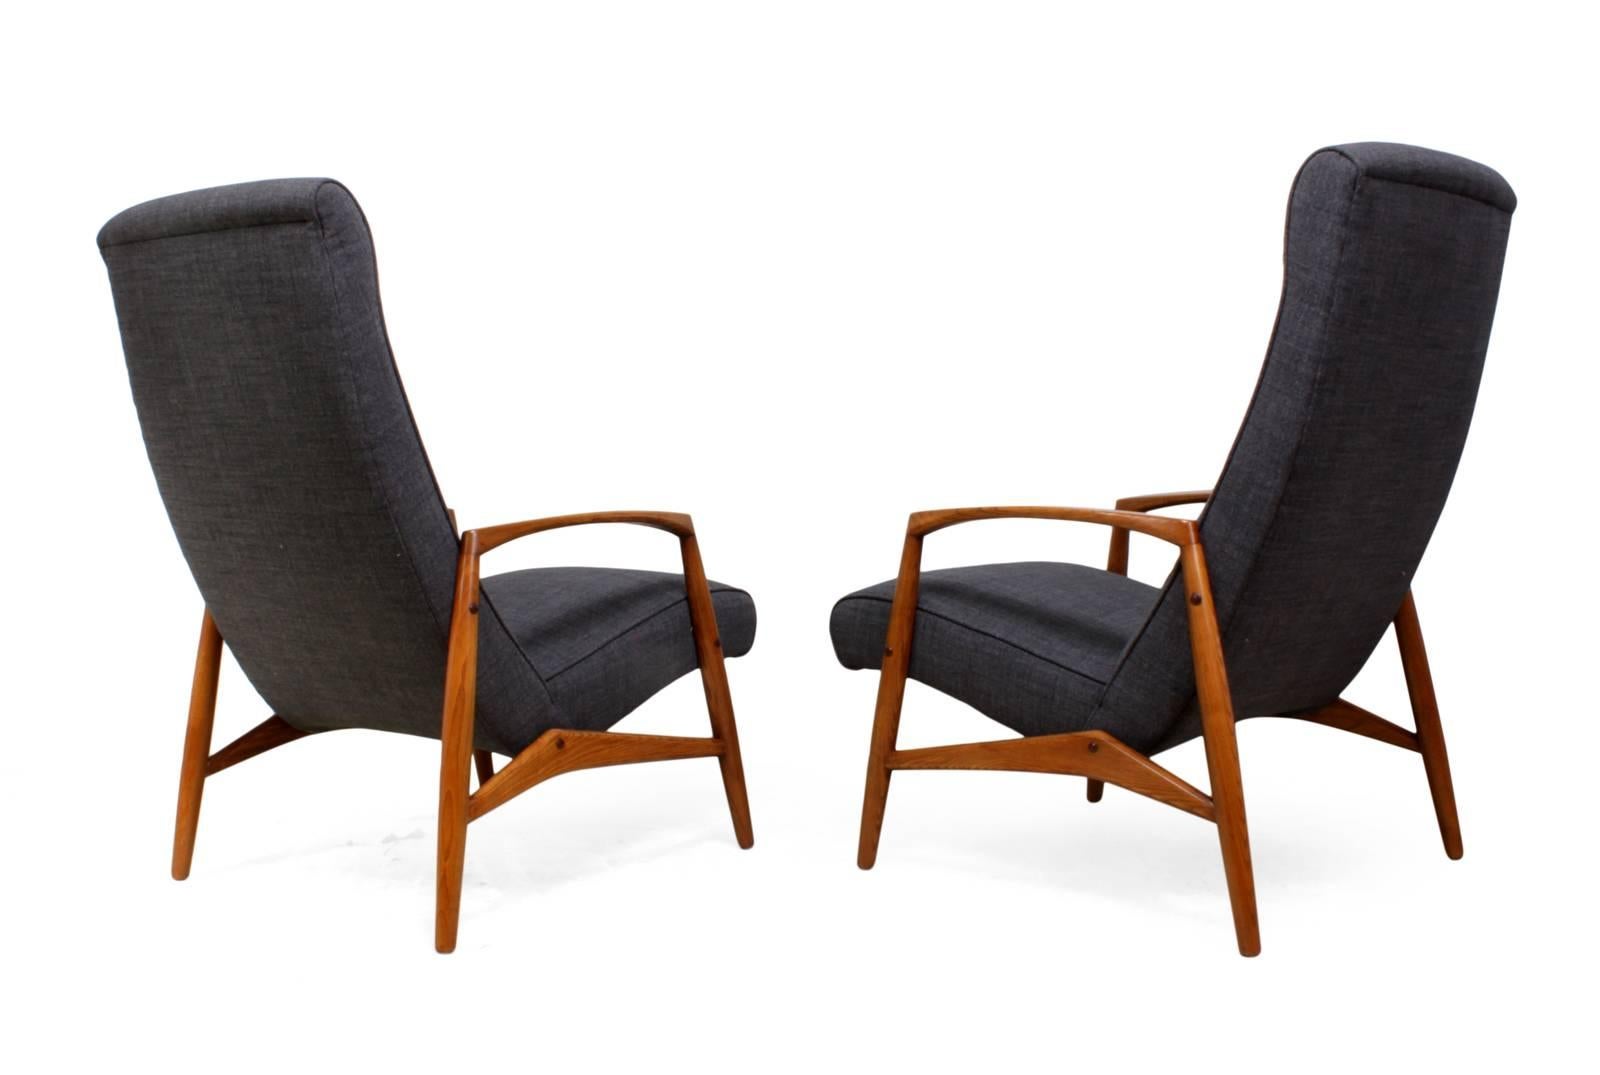 Mid-20th Century Pair of Midcentury Elm Framed Chairs